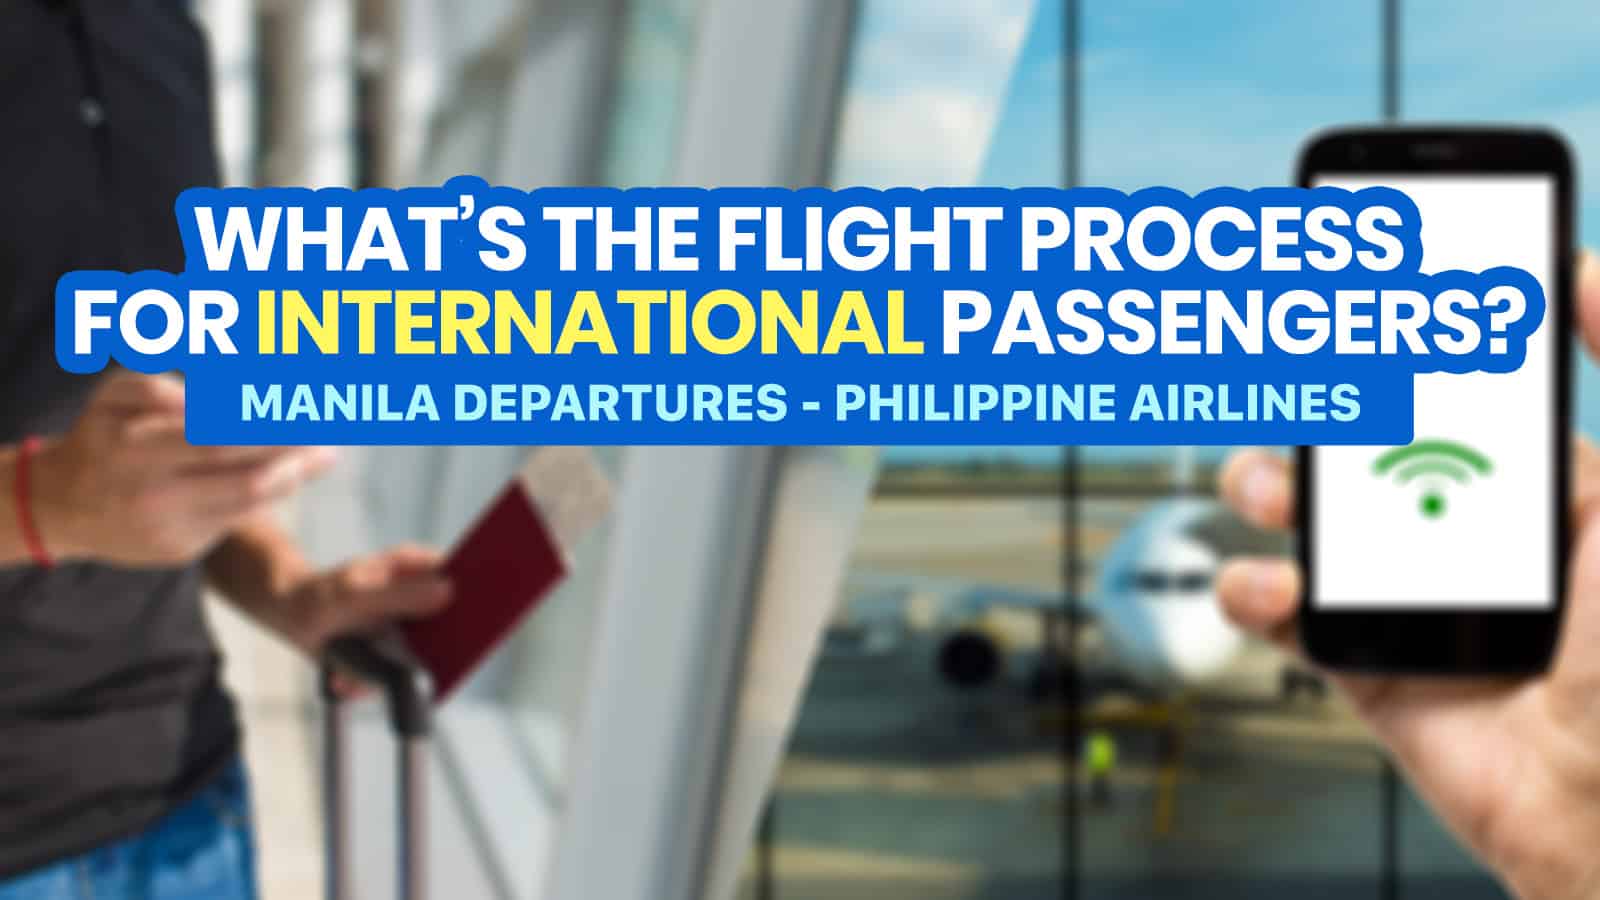 NEW INTERNATIONAL DEPARTURE PROCESS & TRAVEL REQUIREMENTS For PAL